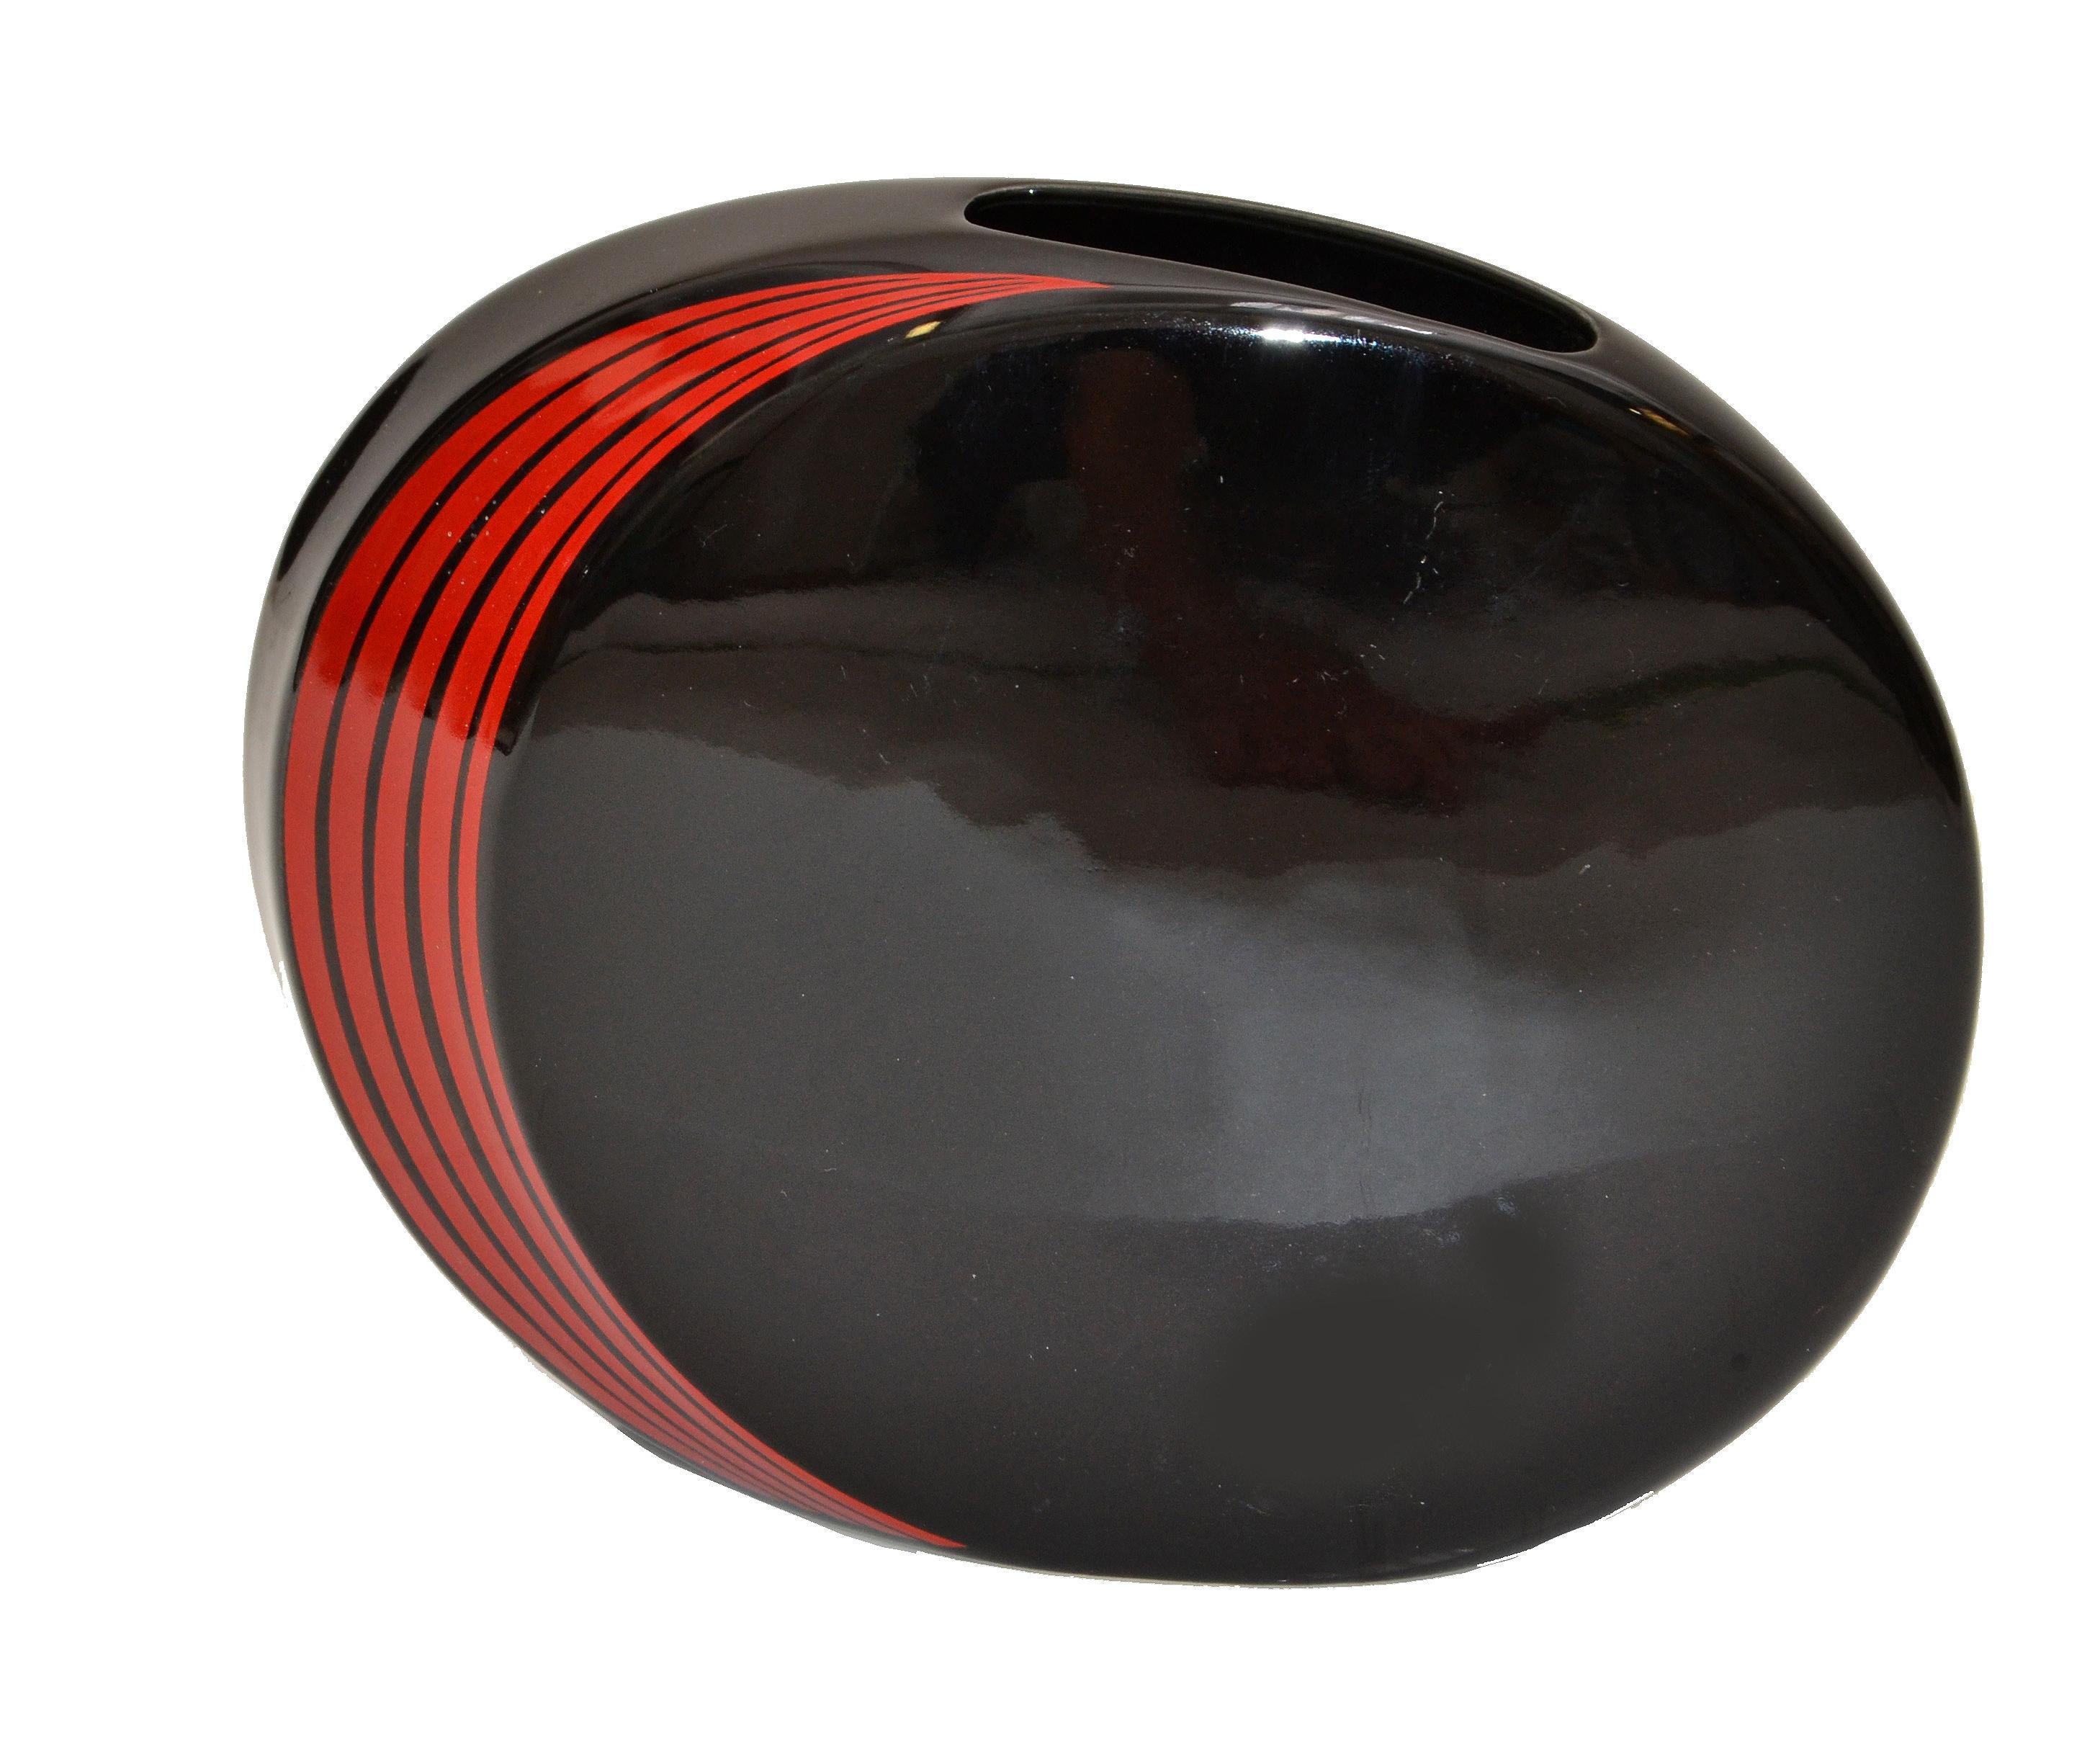 Stunning Mid-Century Modern round and flat Japan black ceramic vase with red stripes. 
Original mark at the base.